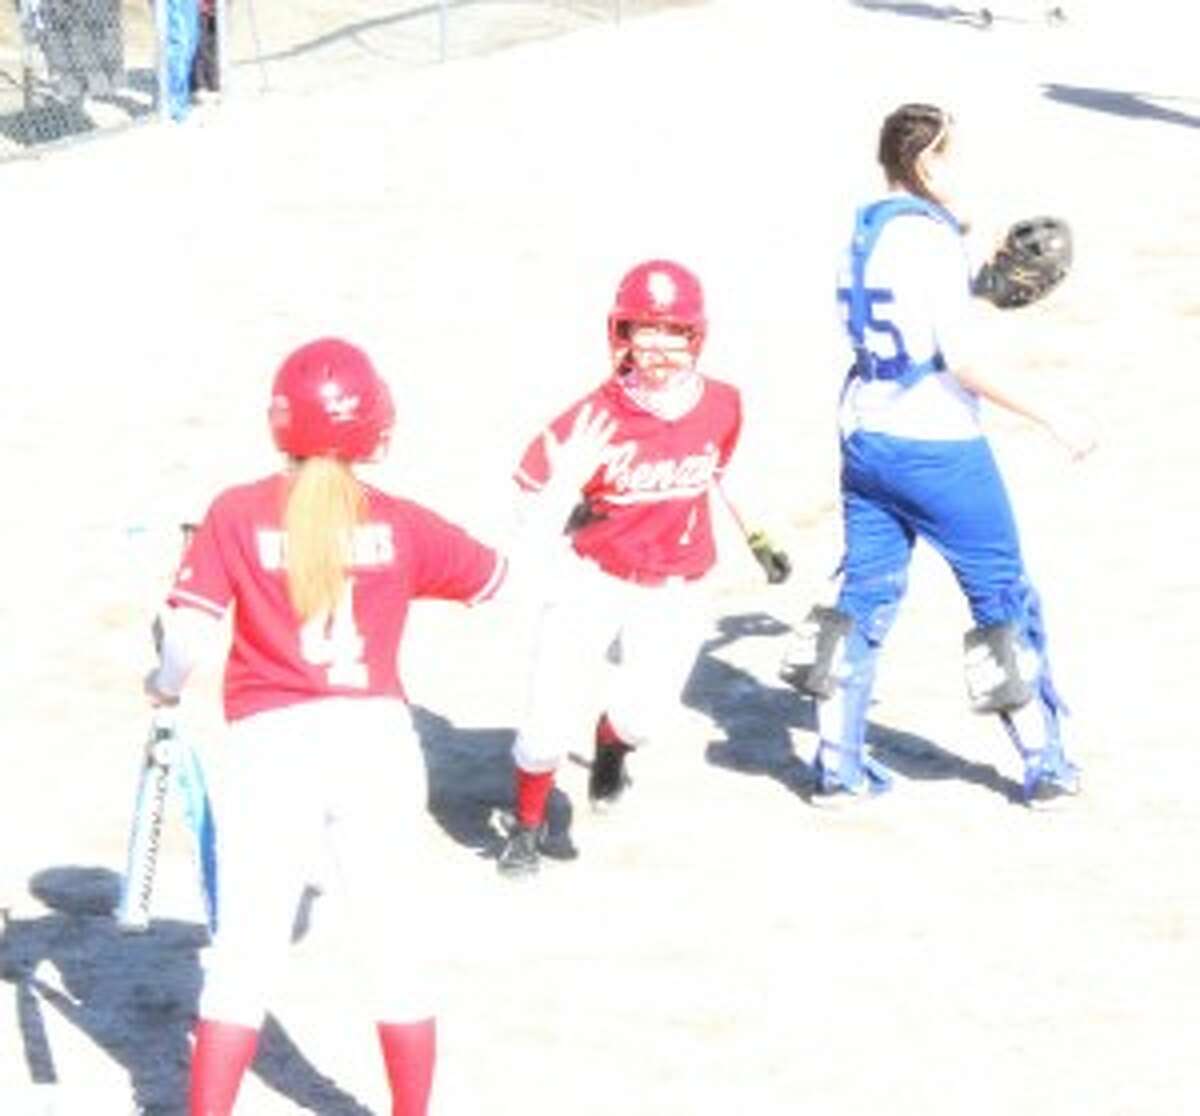 Benzie Softball scores- “The Huskies score a run during the opening game with St. Mary’s. The Benzie Central Huskies offense was big in the first game, putting up six runs.” (Photo/Bryan Warrick)